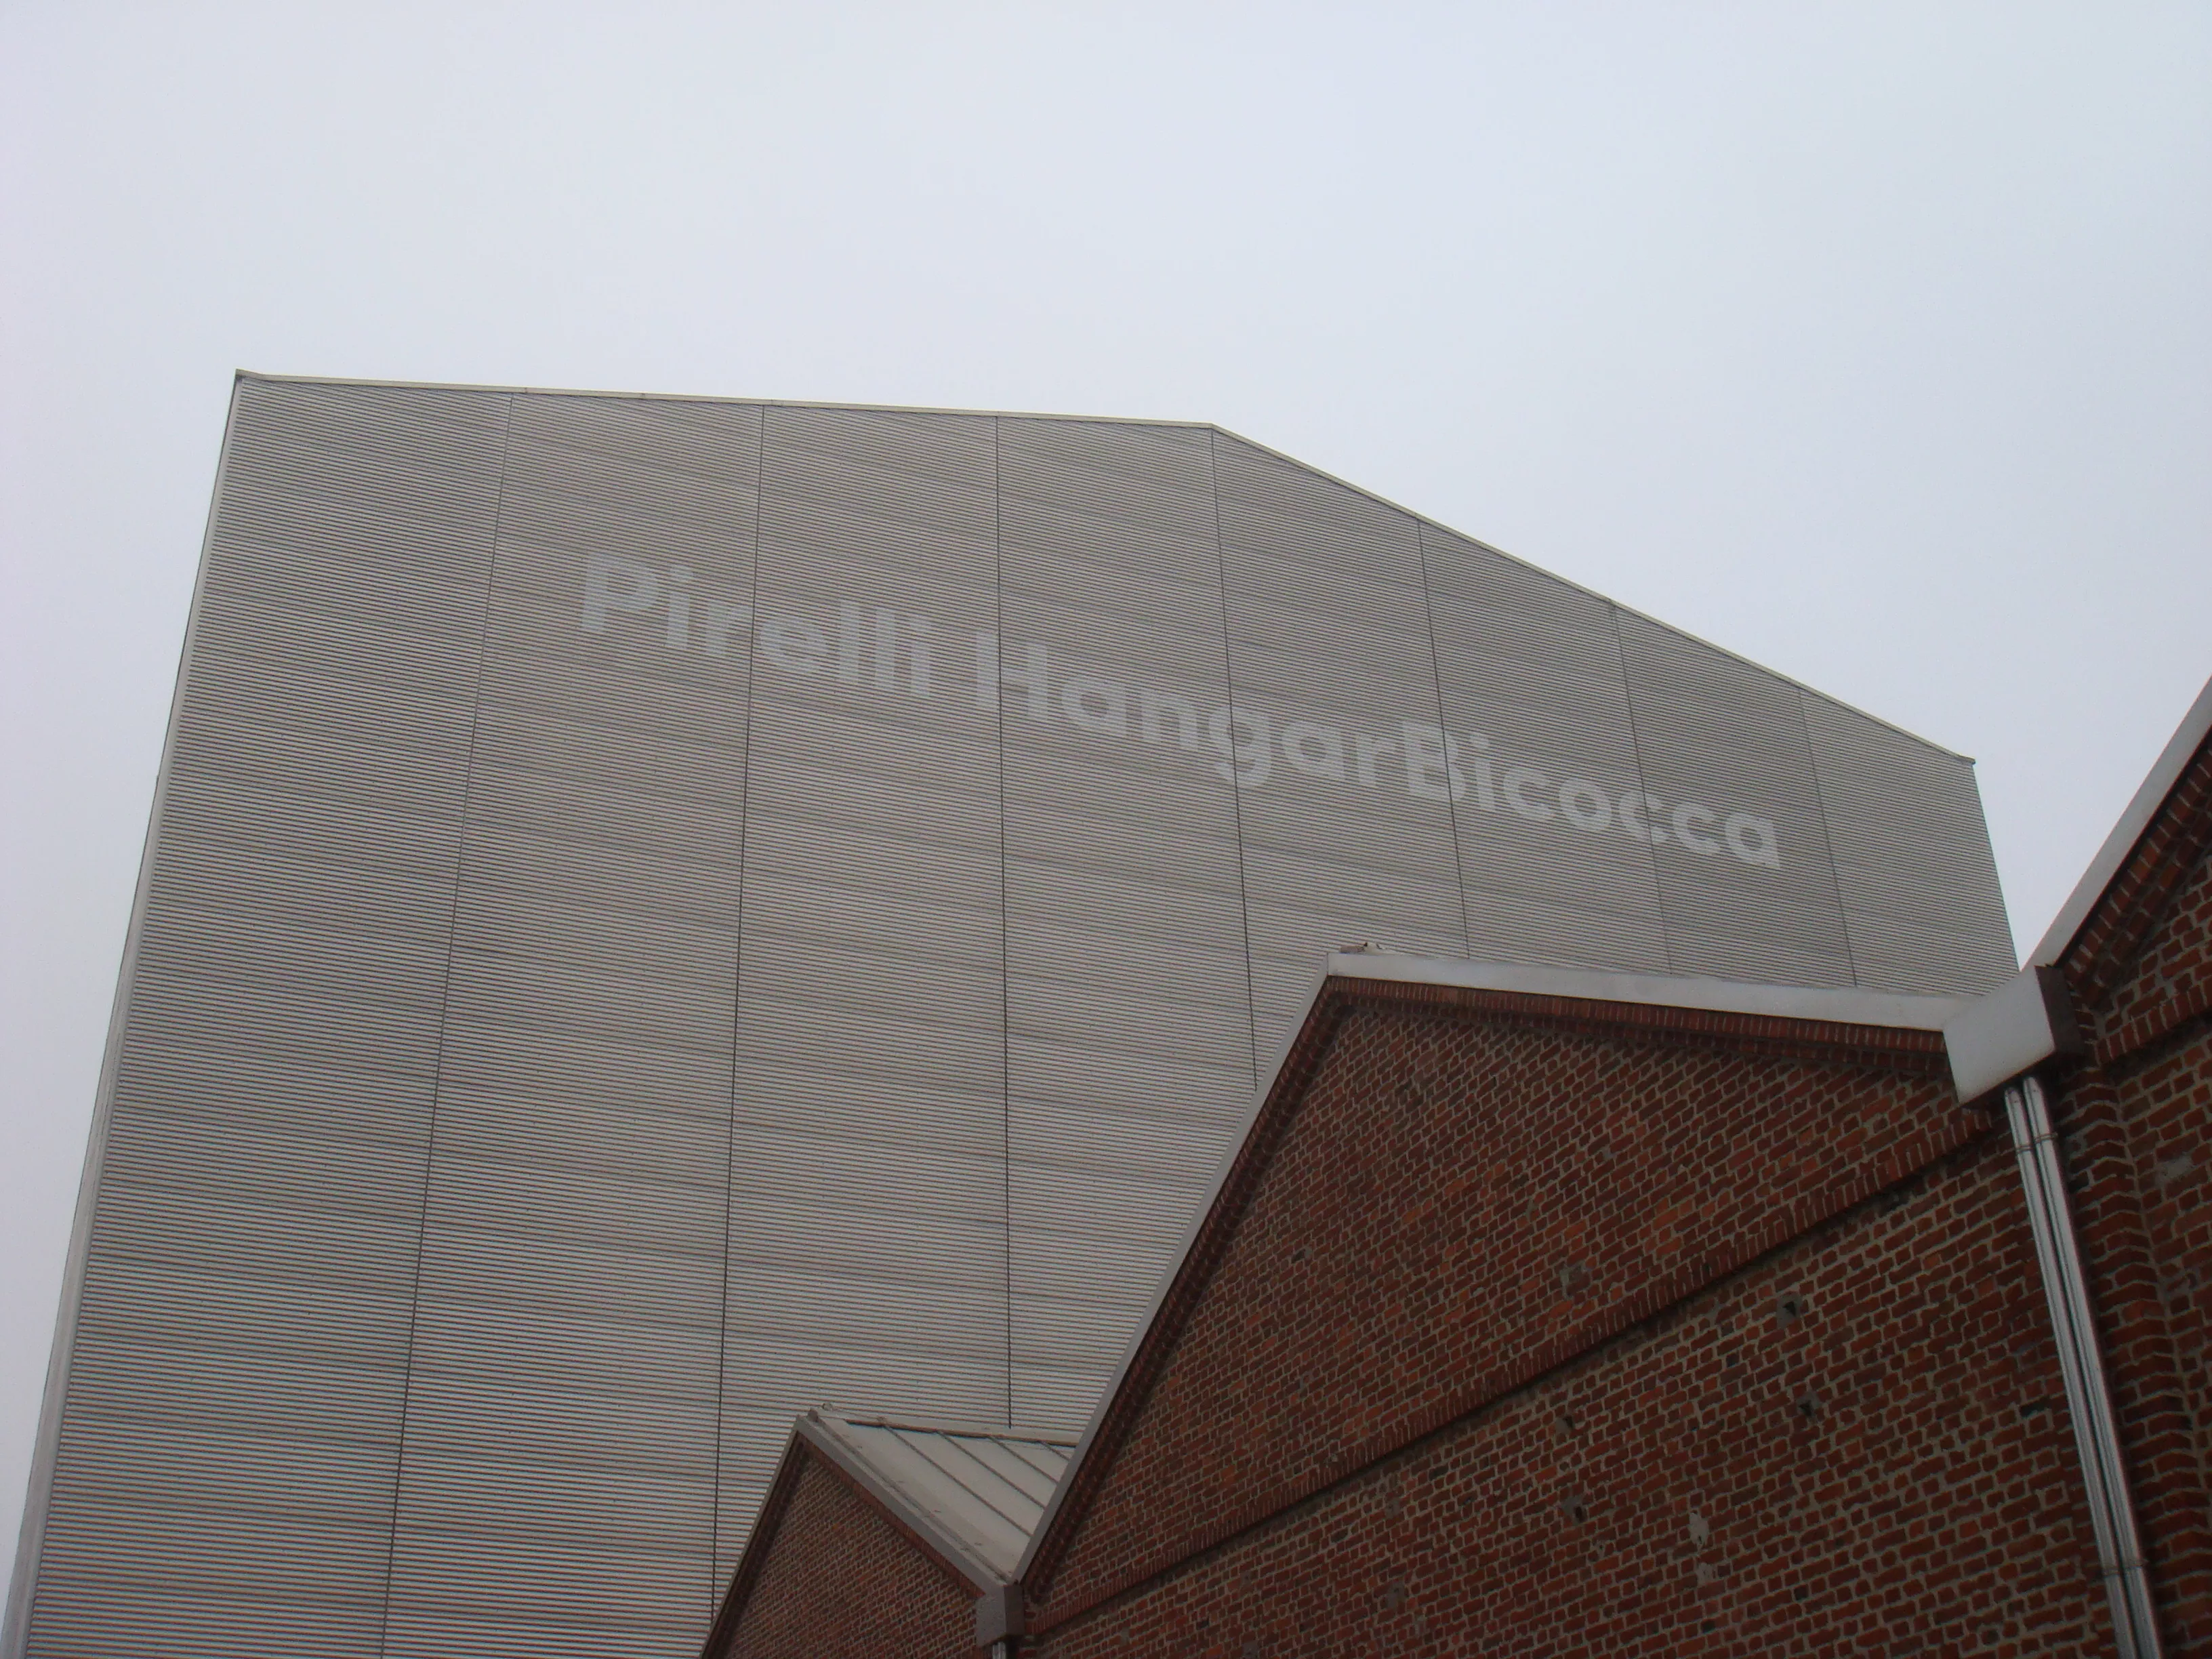 Pirelli Hangar in Italy, Europe | Museums - Rated 3.8